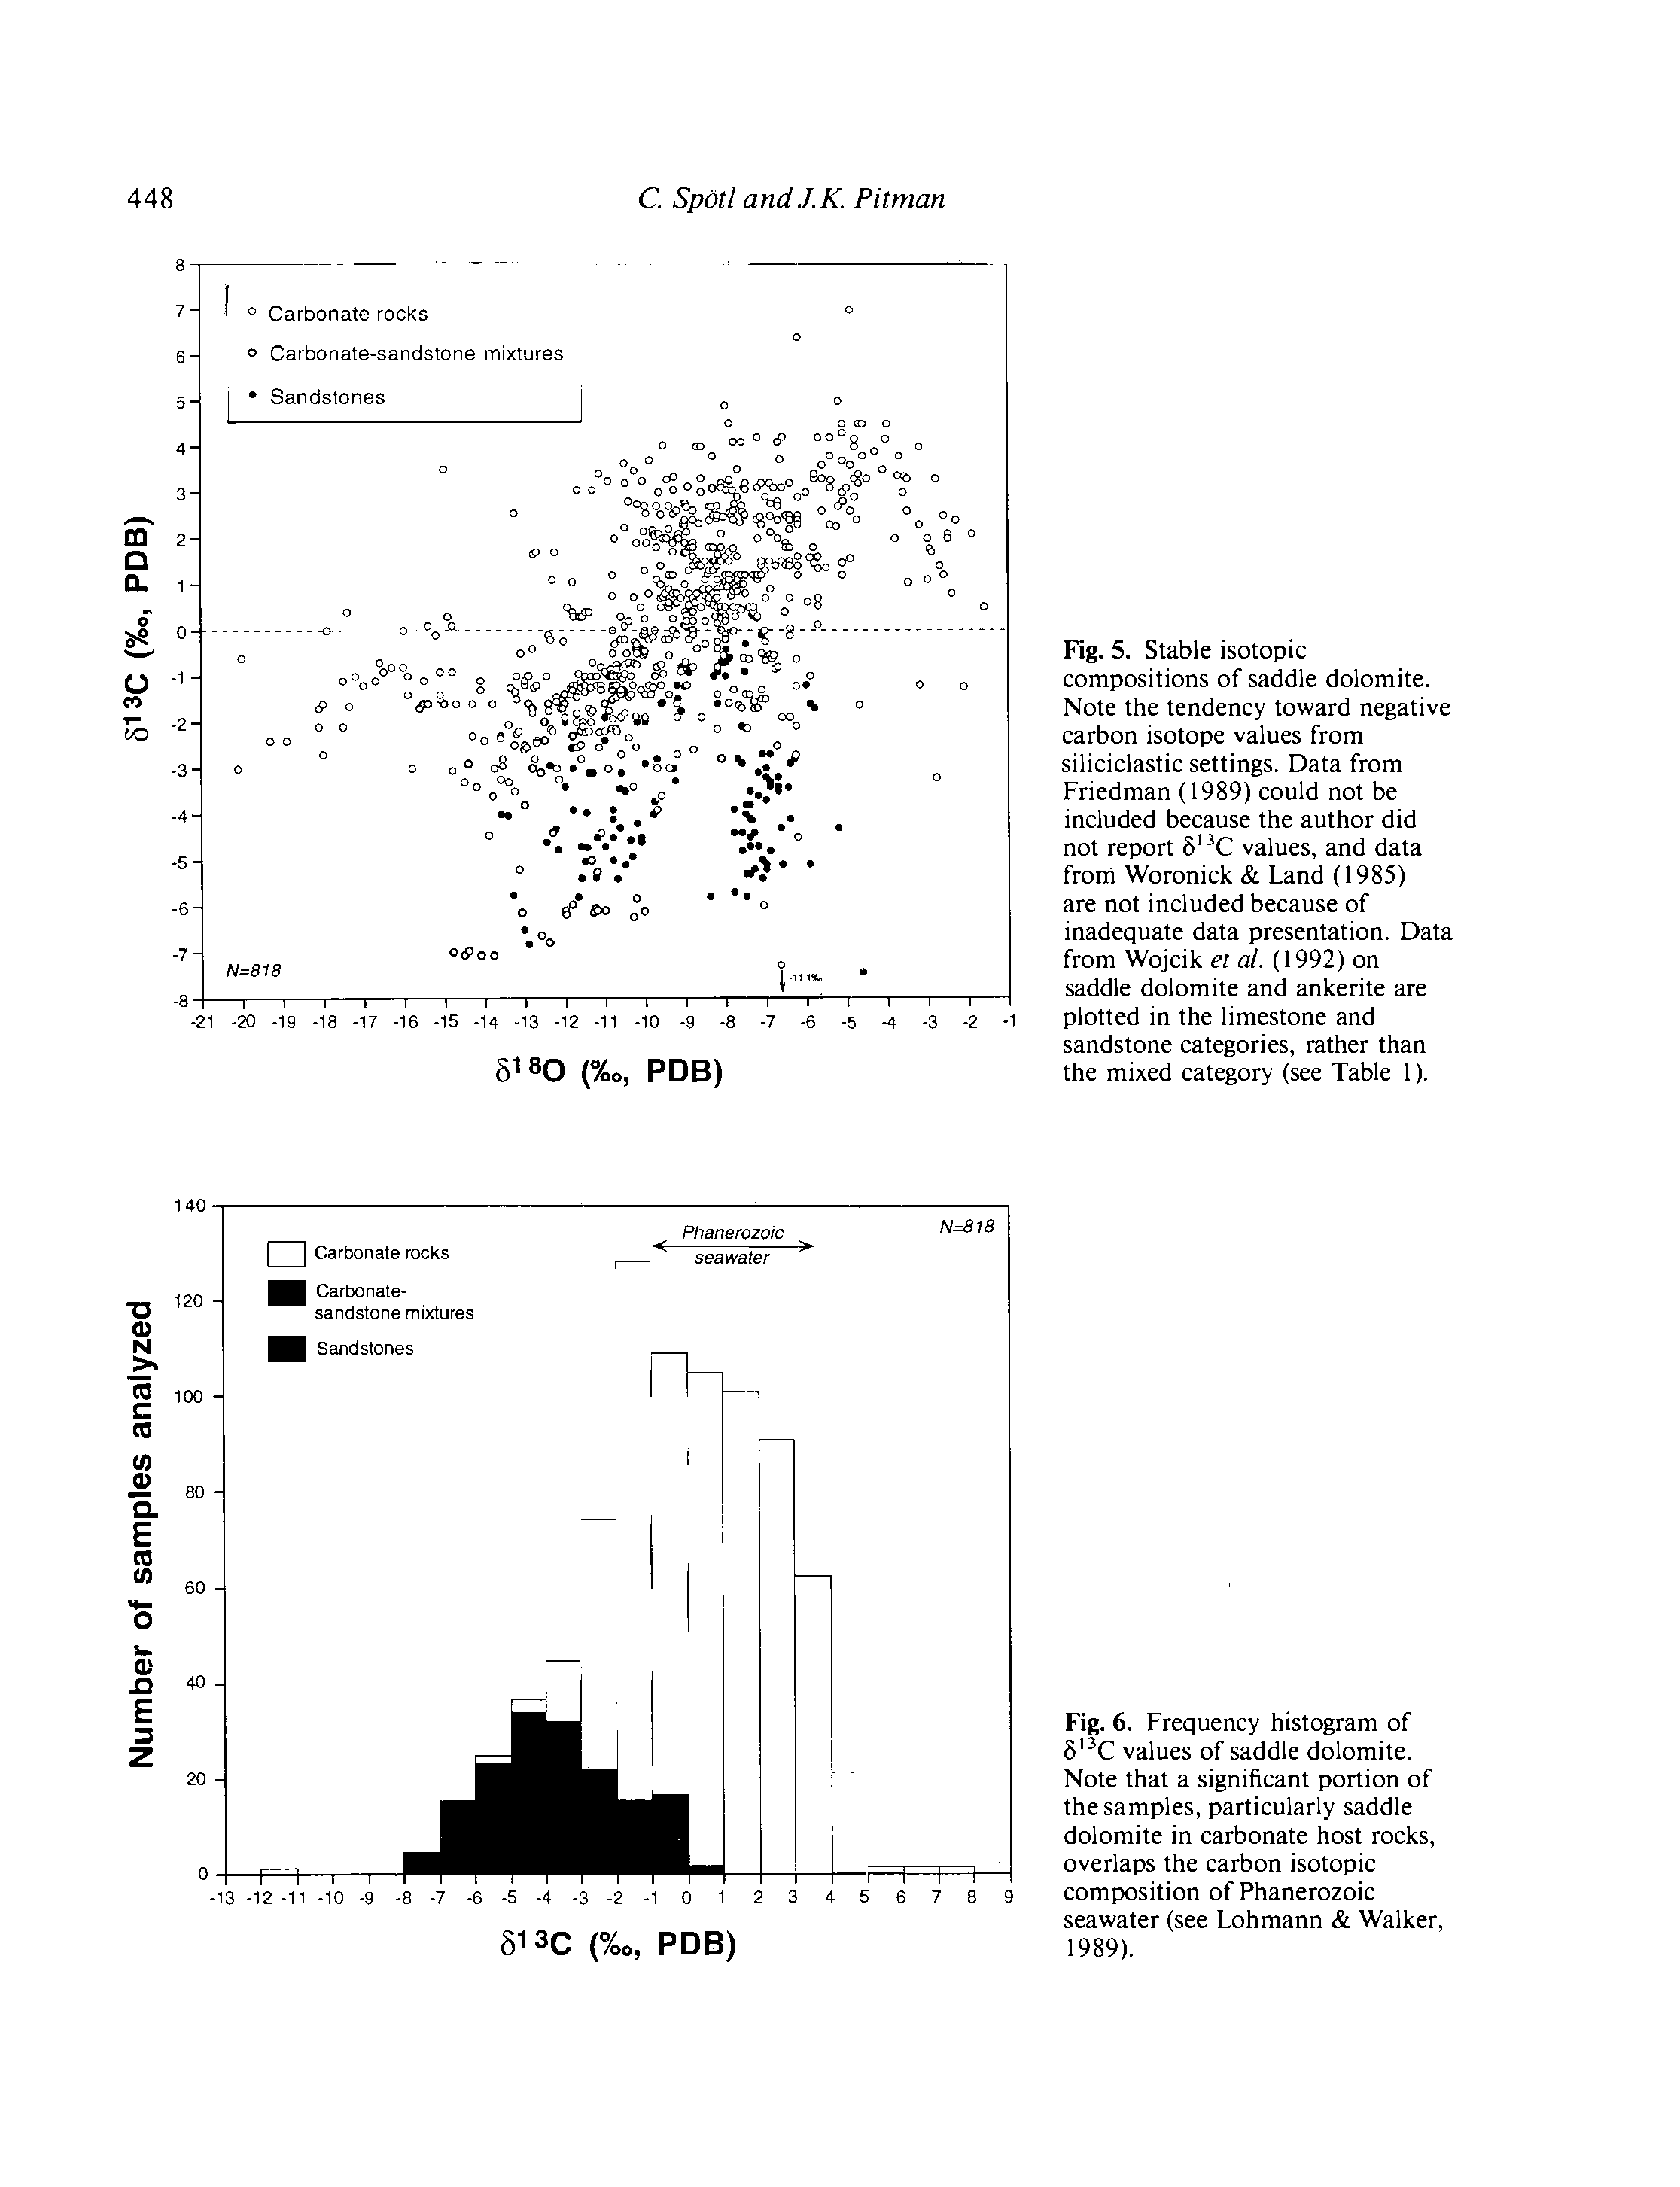 Fig. 5. Stable isotopic compositions of saddle dolomite. Note the tendency toward negative carbon isotope values from siliciclastic settings. Data from Friedman (1989) could not be included because the author did not report 6 - C values, and data from Woronick Land (1985) are not included because of inadequate data presentation. Data from Wojcik et al. (1992) on saddle dolomite and ankerite are plotted in the limestone and sandstone categories, rather than the mixed category (see Table 1).